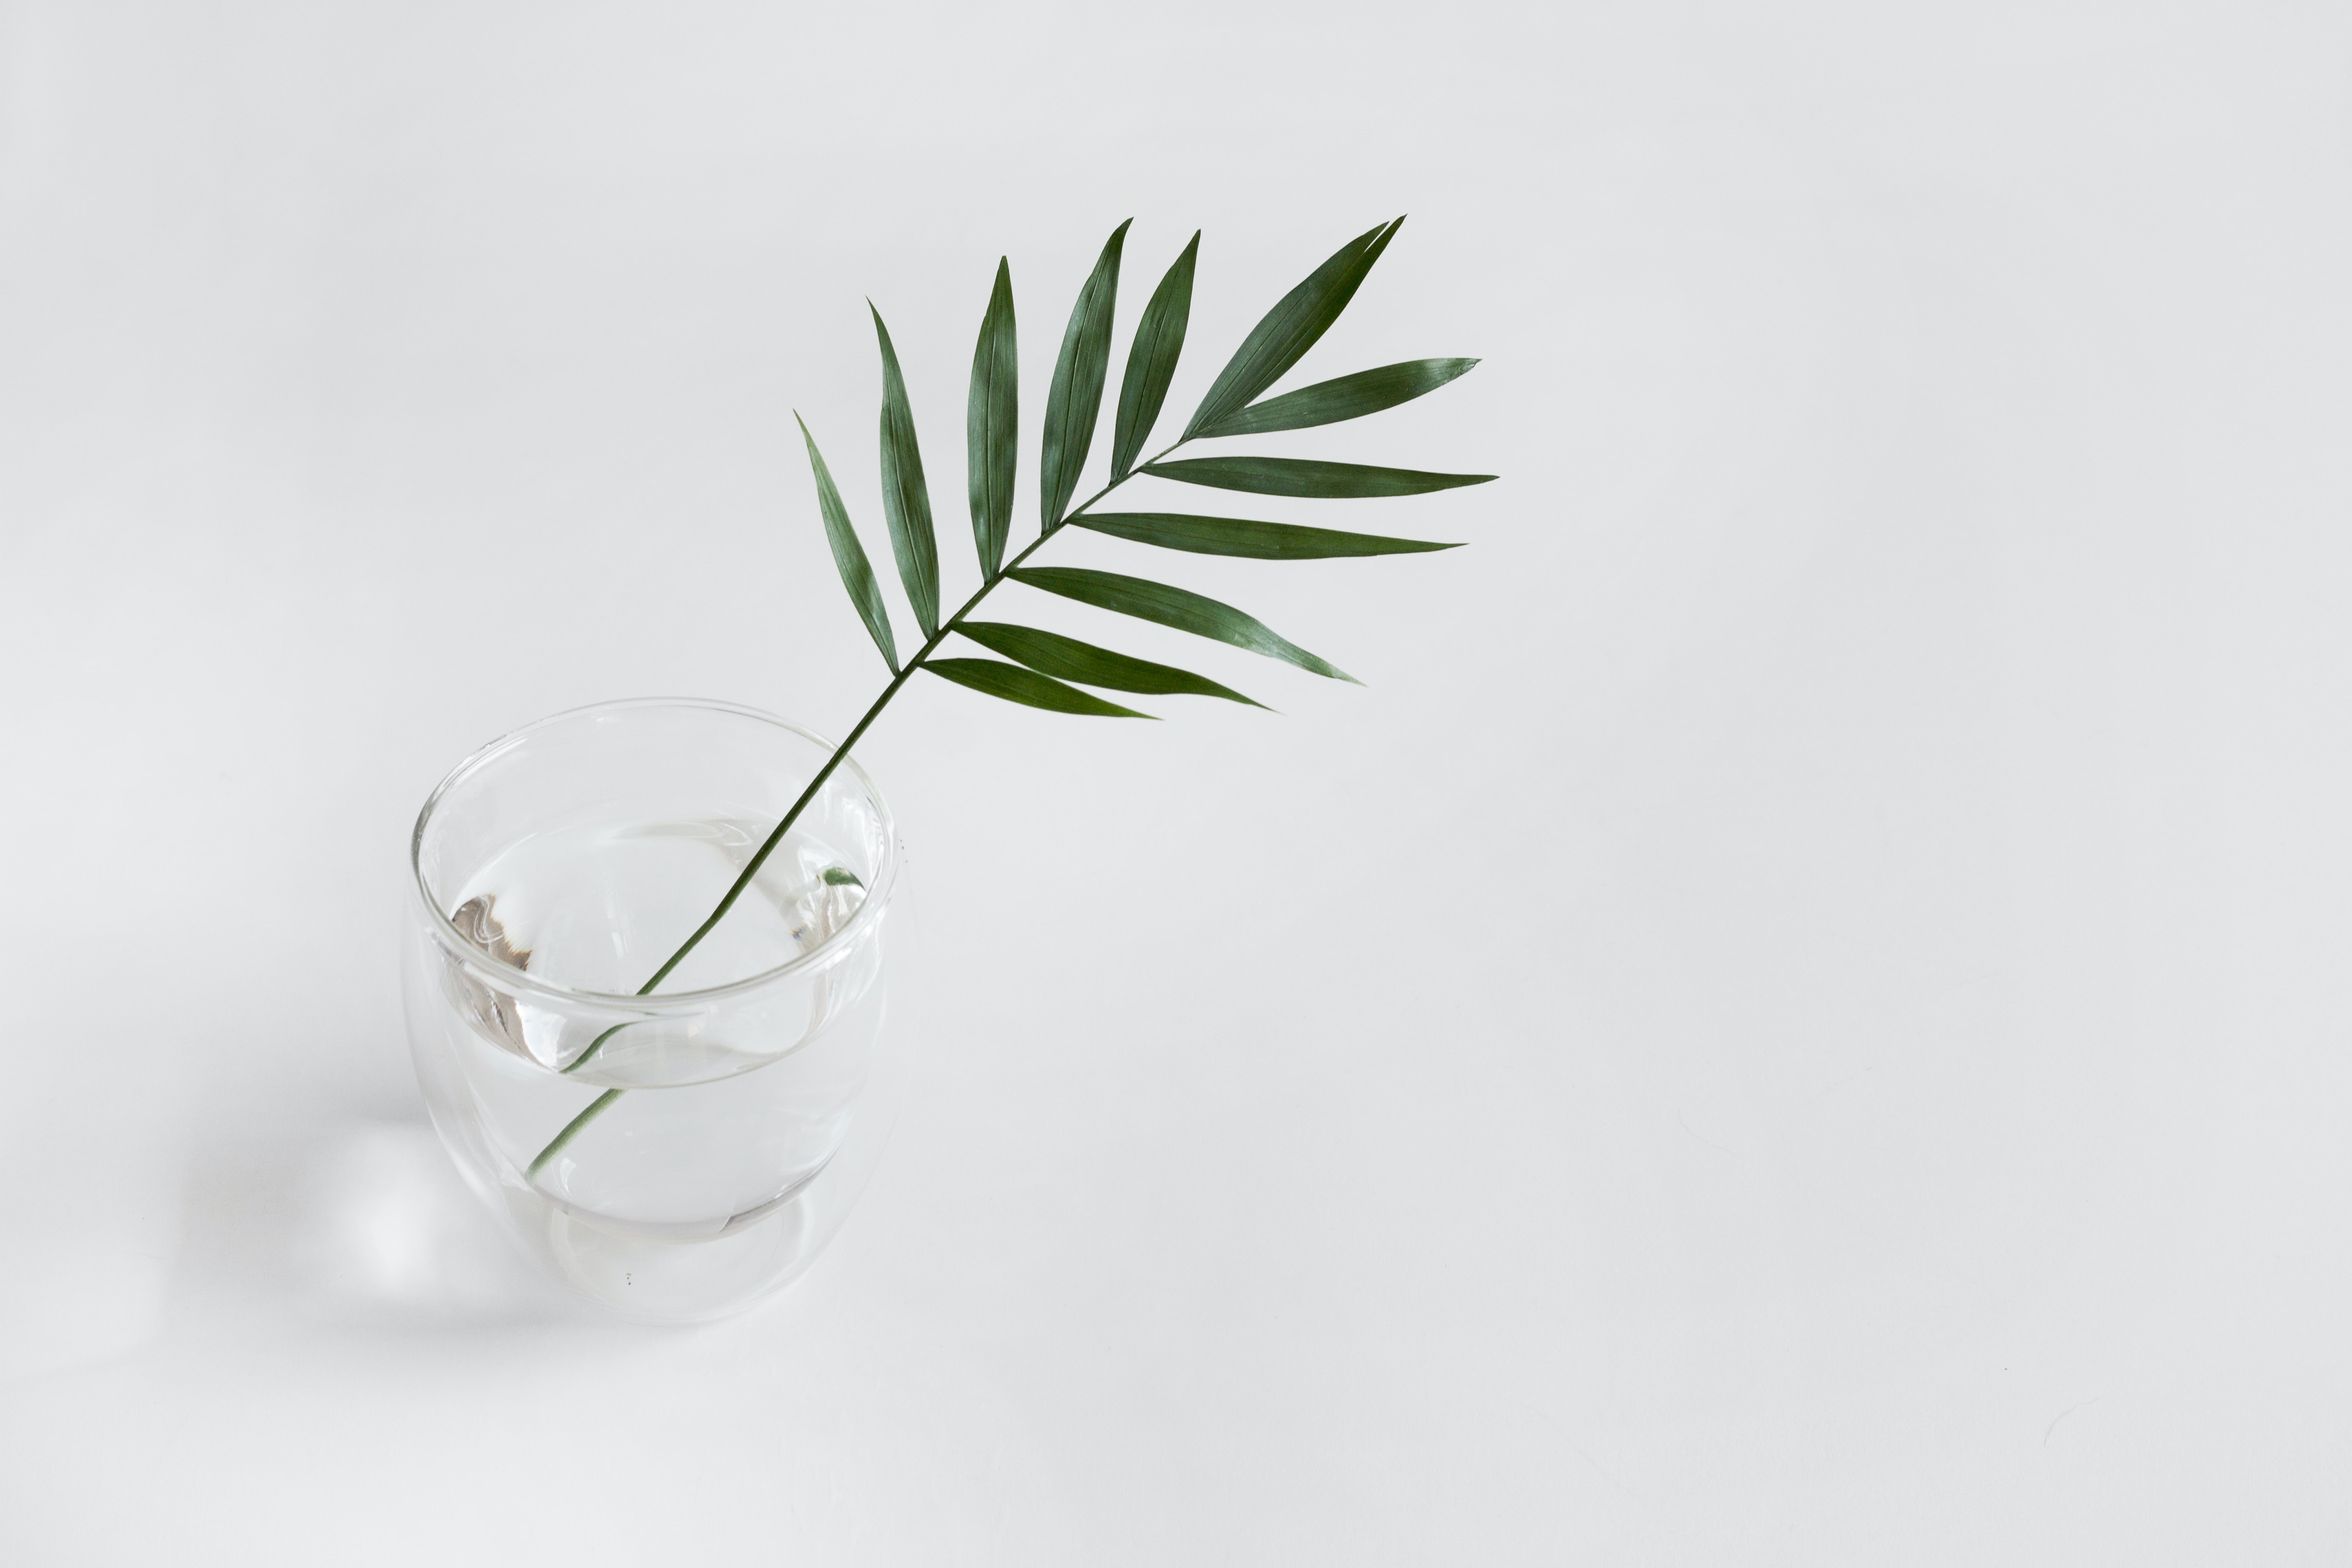 A glass of water with a long, leaf placed inside